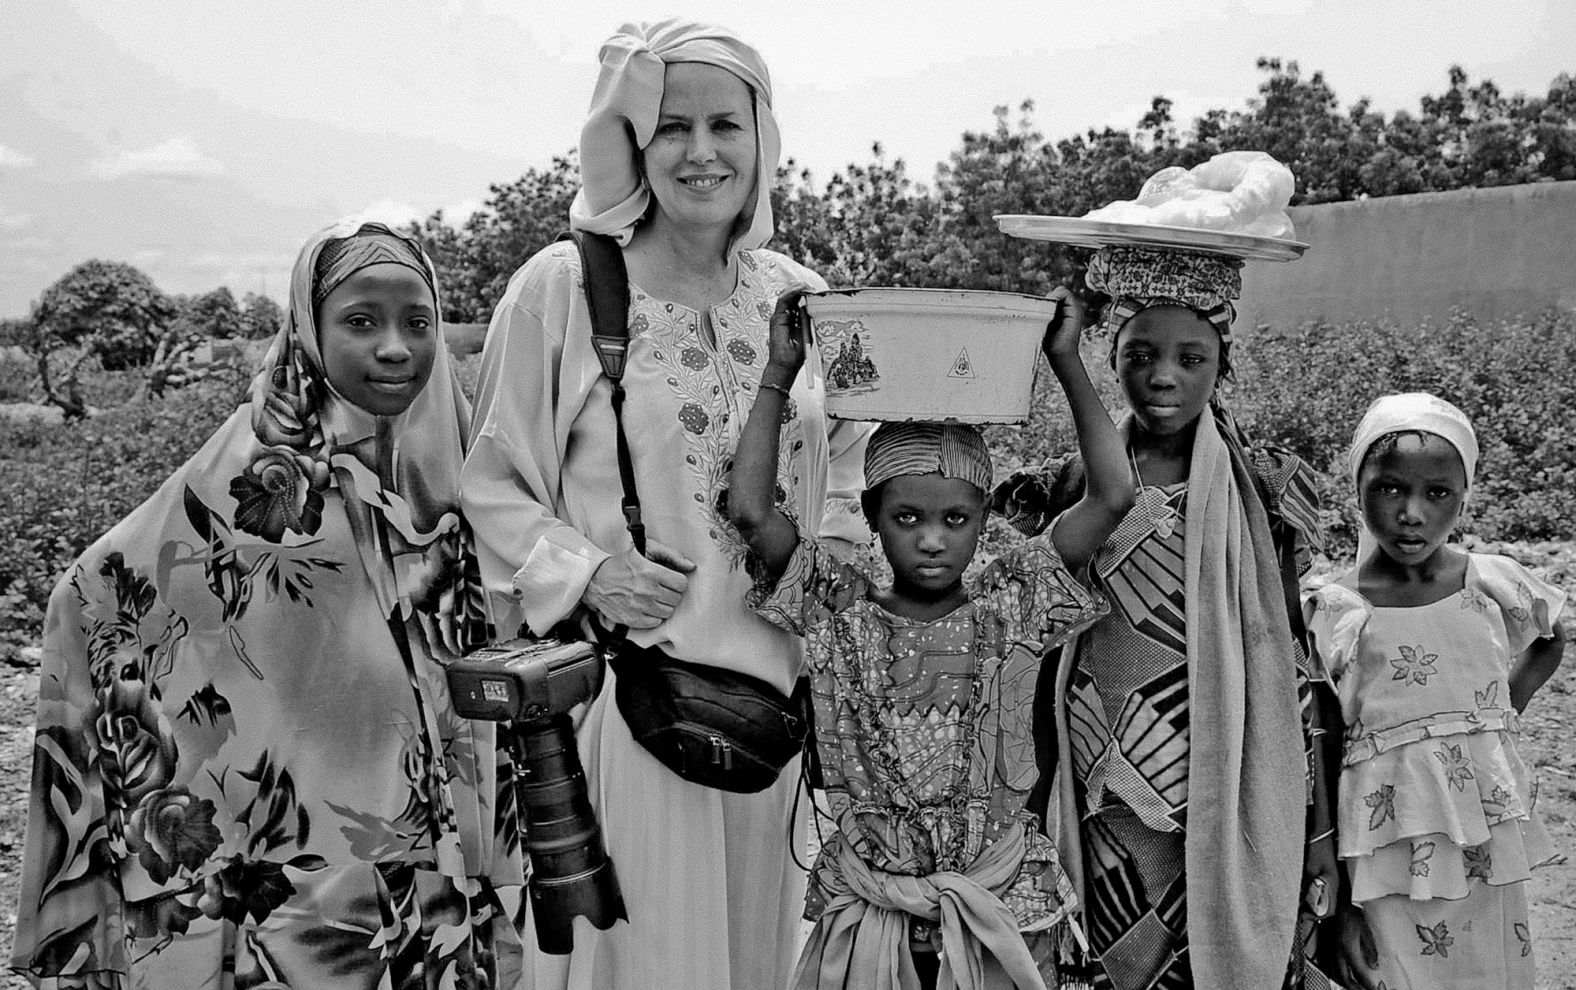 <a href="index.php?page=&url=http%3A%2F%2Fmaryfcalvert.com%2F" target="_blank" target="_blank">Mary F. Calvert</a> works on a story about polio while in Nigeria in 2010. "I specialize in underreported and neglected human-rights issues and actively seek out projects about our society's most marginalized and forgotten people," she said. One of her recent projects, <a href="index.php?page=&url=https%3A%2F%2Fwww.nytimes.com%2Finteractive%2F2019%2F09%2F10%2Fus%2Fmen-military-sexual-assault.html" target="_blank" target="_blank">featured by The New York Times</a>, profiles men who have been sexually assaulted while serving in the US military. She has received several honors for this series, including the Canon Female Photojournalist Award.